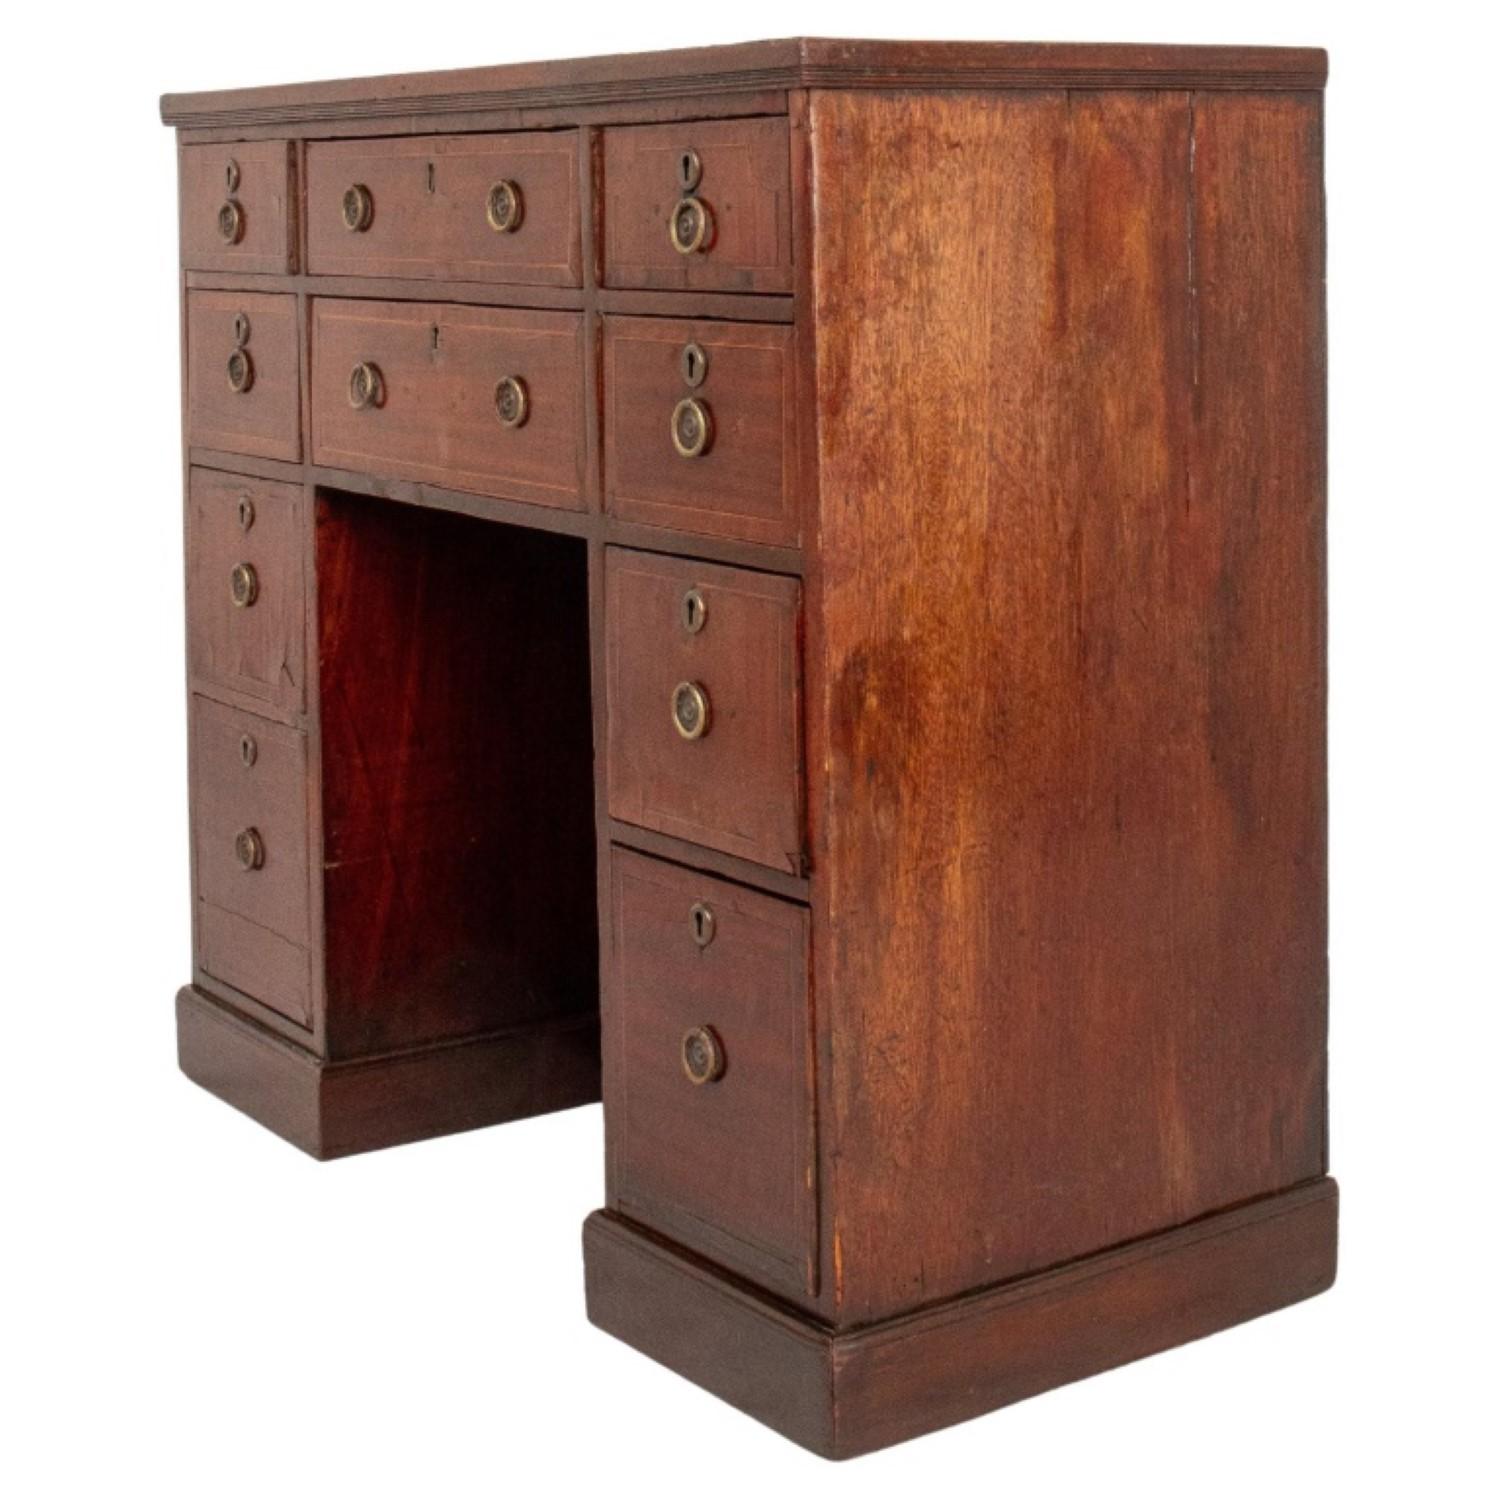 
The George III Walnut Tall Kneehole Desk, dating from around 1800, features 9 short drawers.

 Its dimensions are approximately 35 inches in height, 38.5 inches in width, and 18 inches in depth.